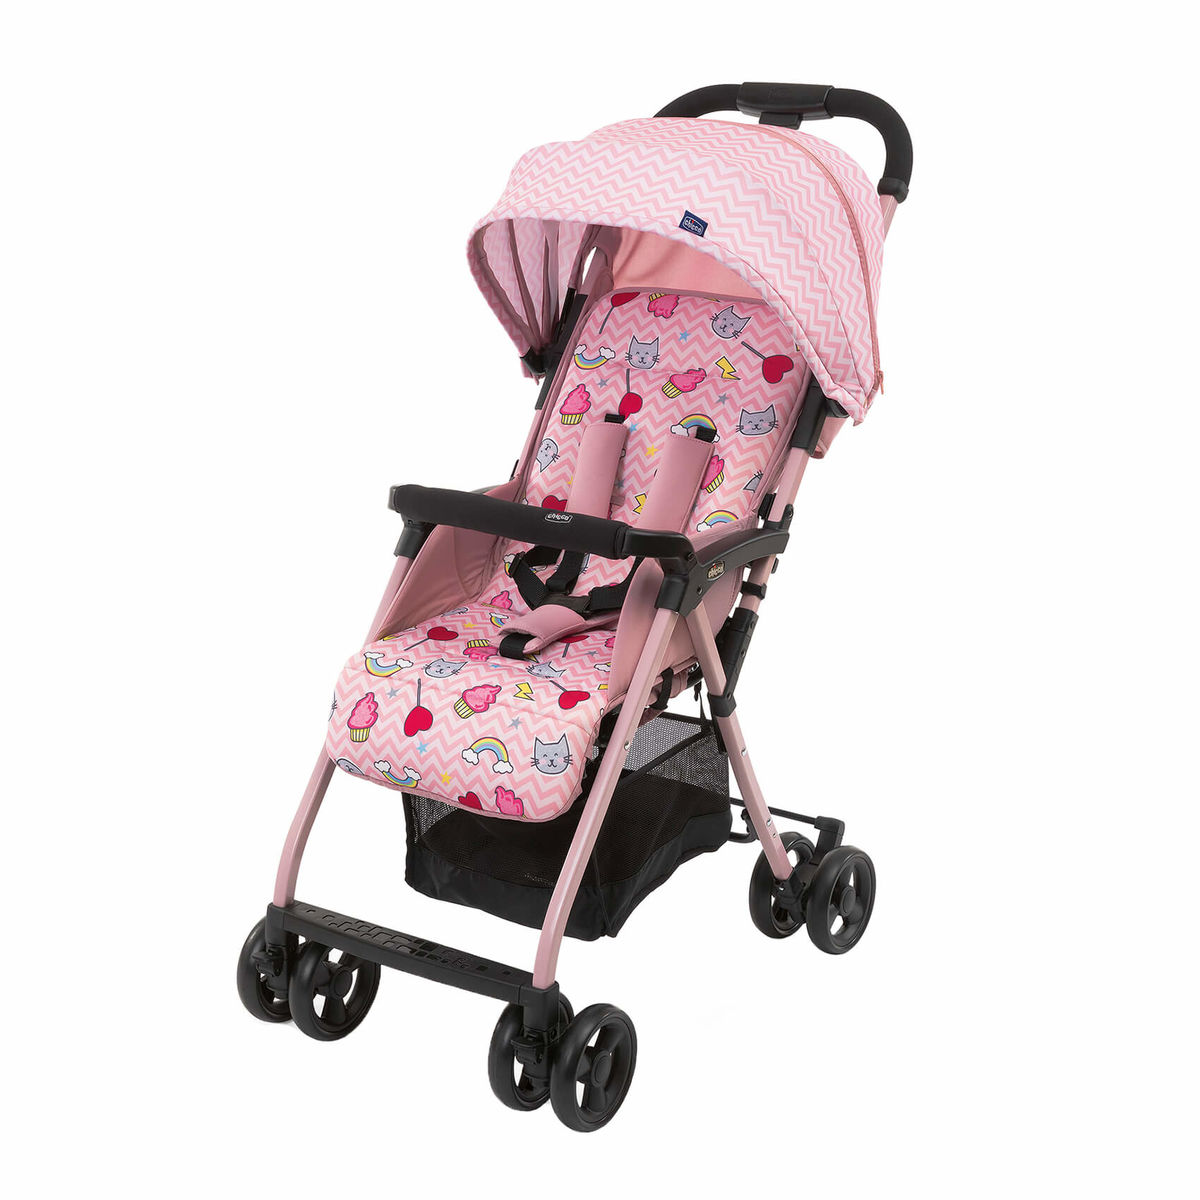 Image of Chicco Ohlalà3 Kinderwagen Candy Pink bei nettoshop.ch